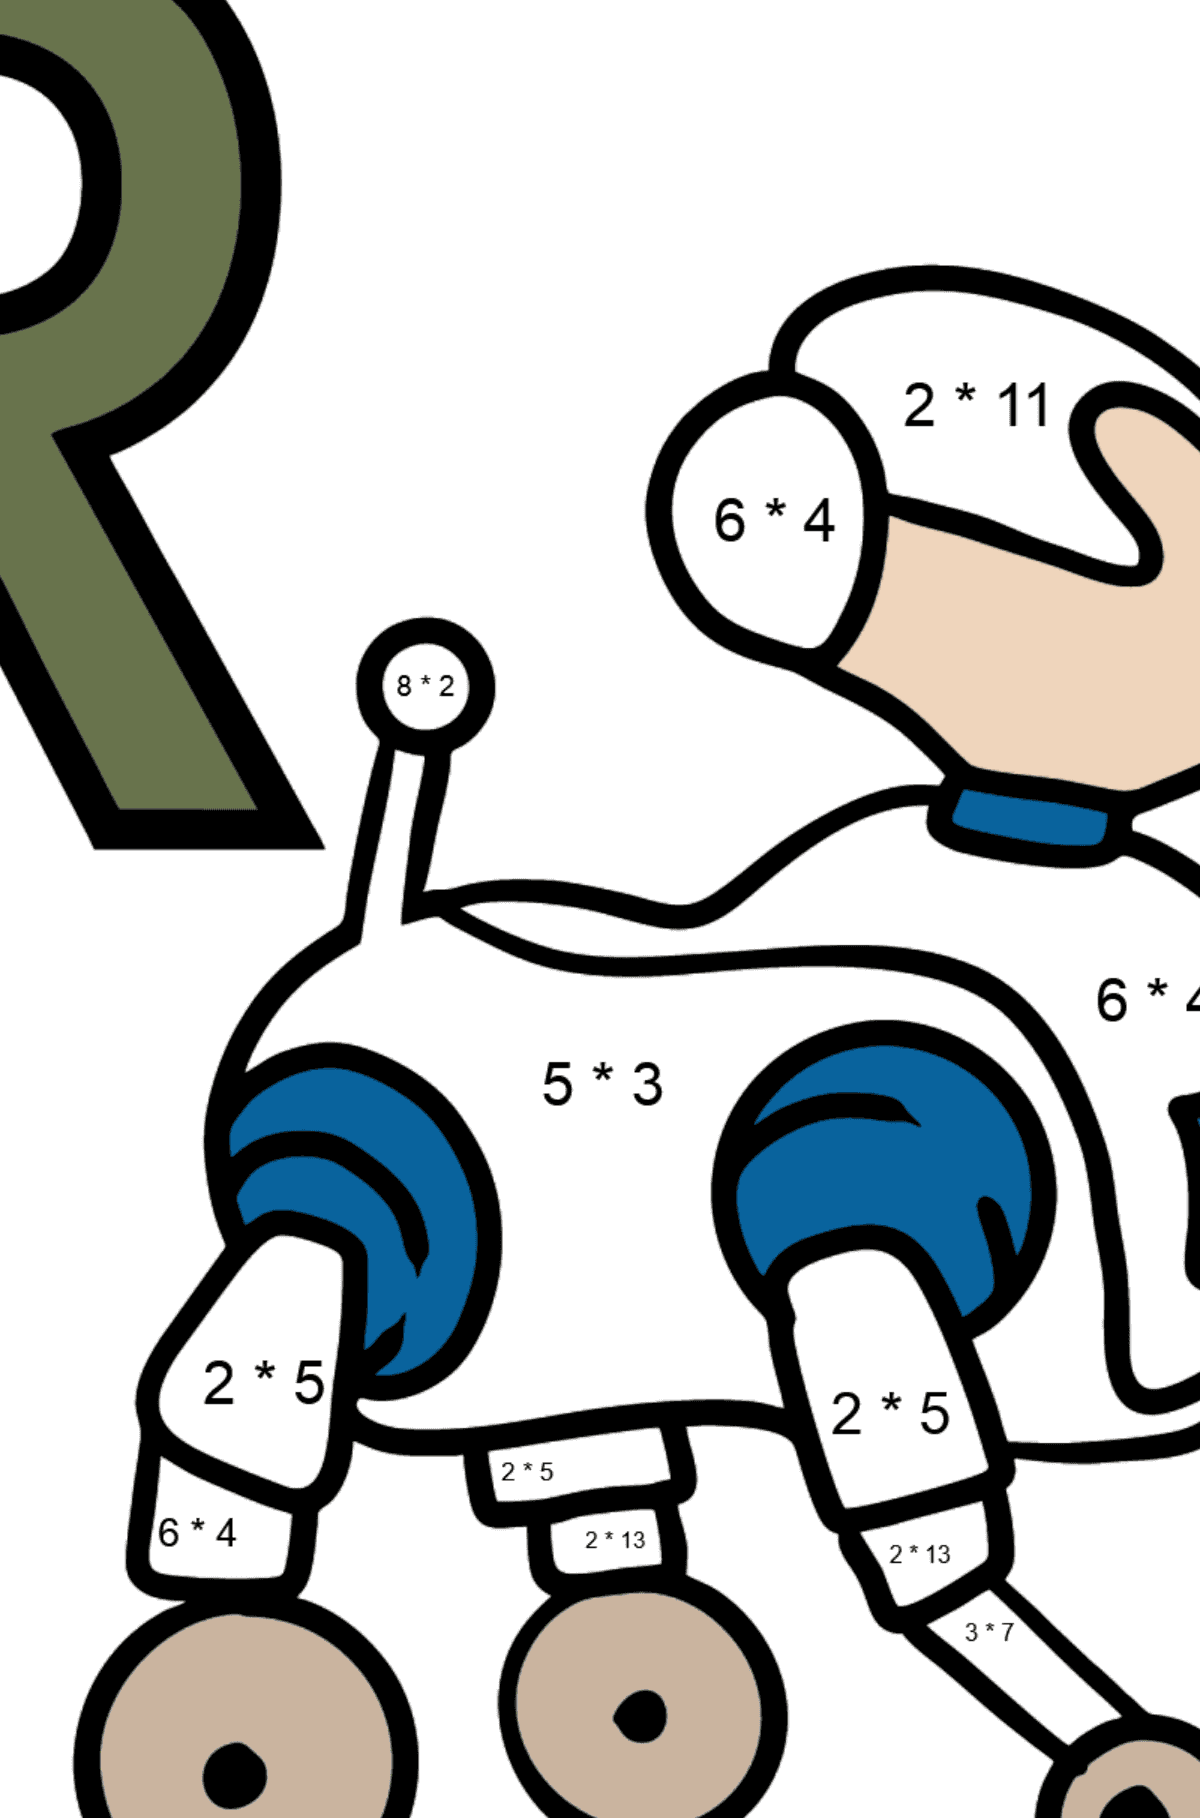 Portuguese Letter R coloring pages - ROBÔ - Math Coloring - Multiplication for Kids